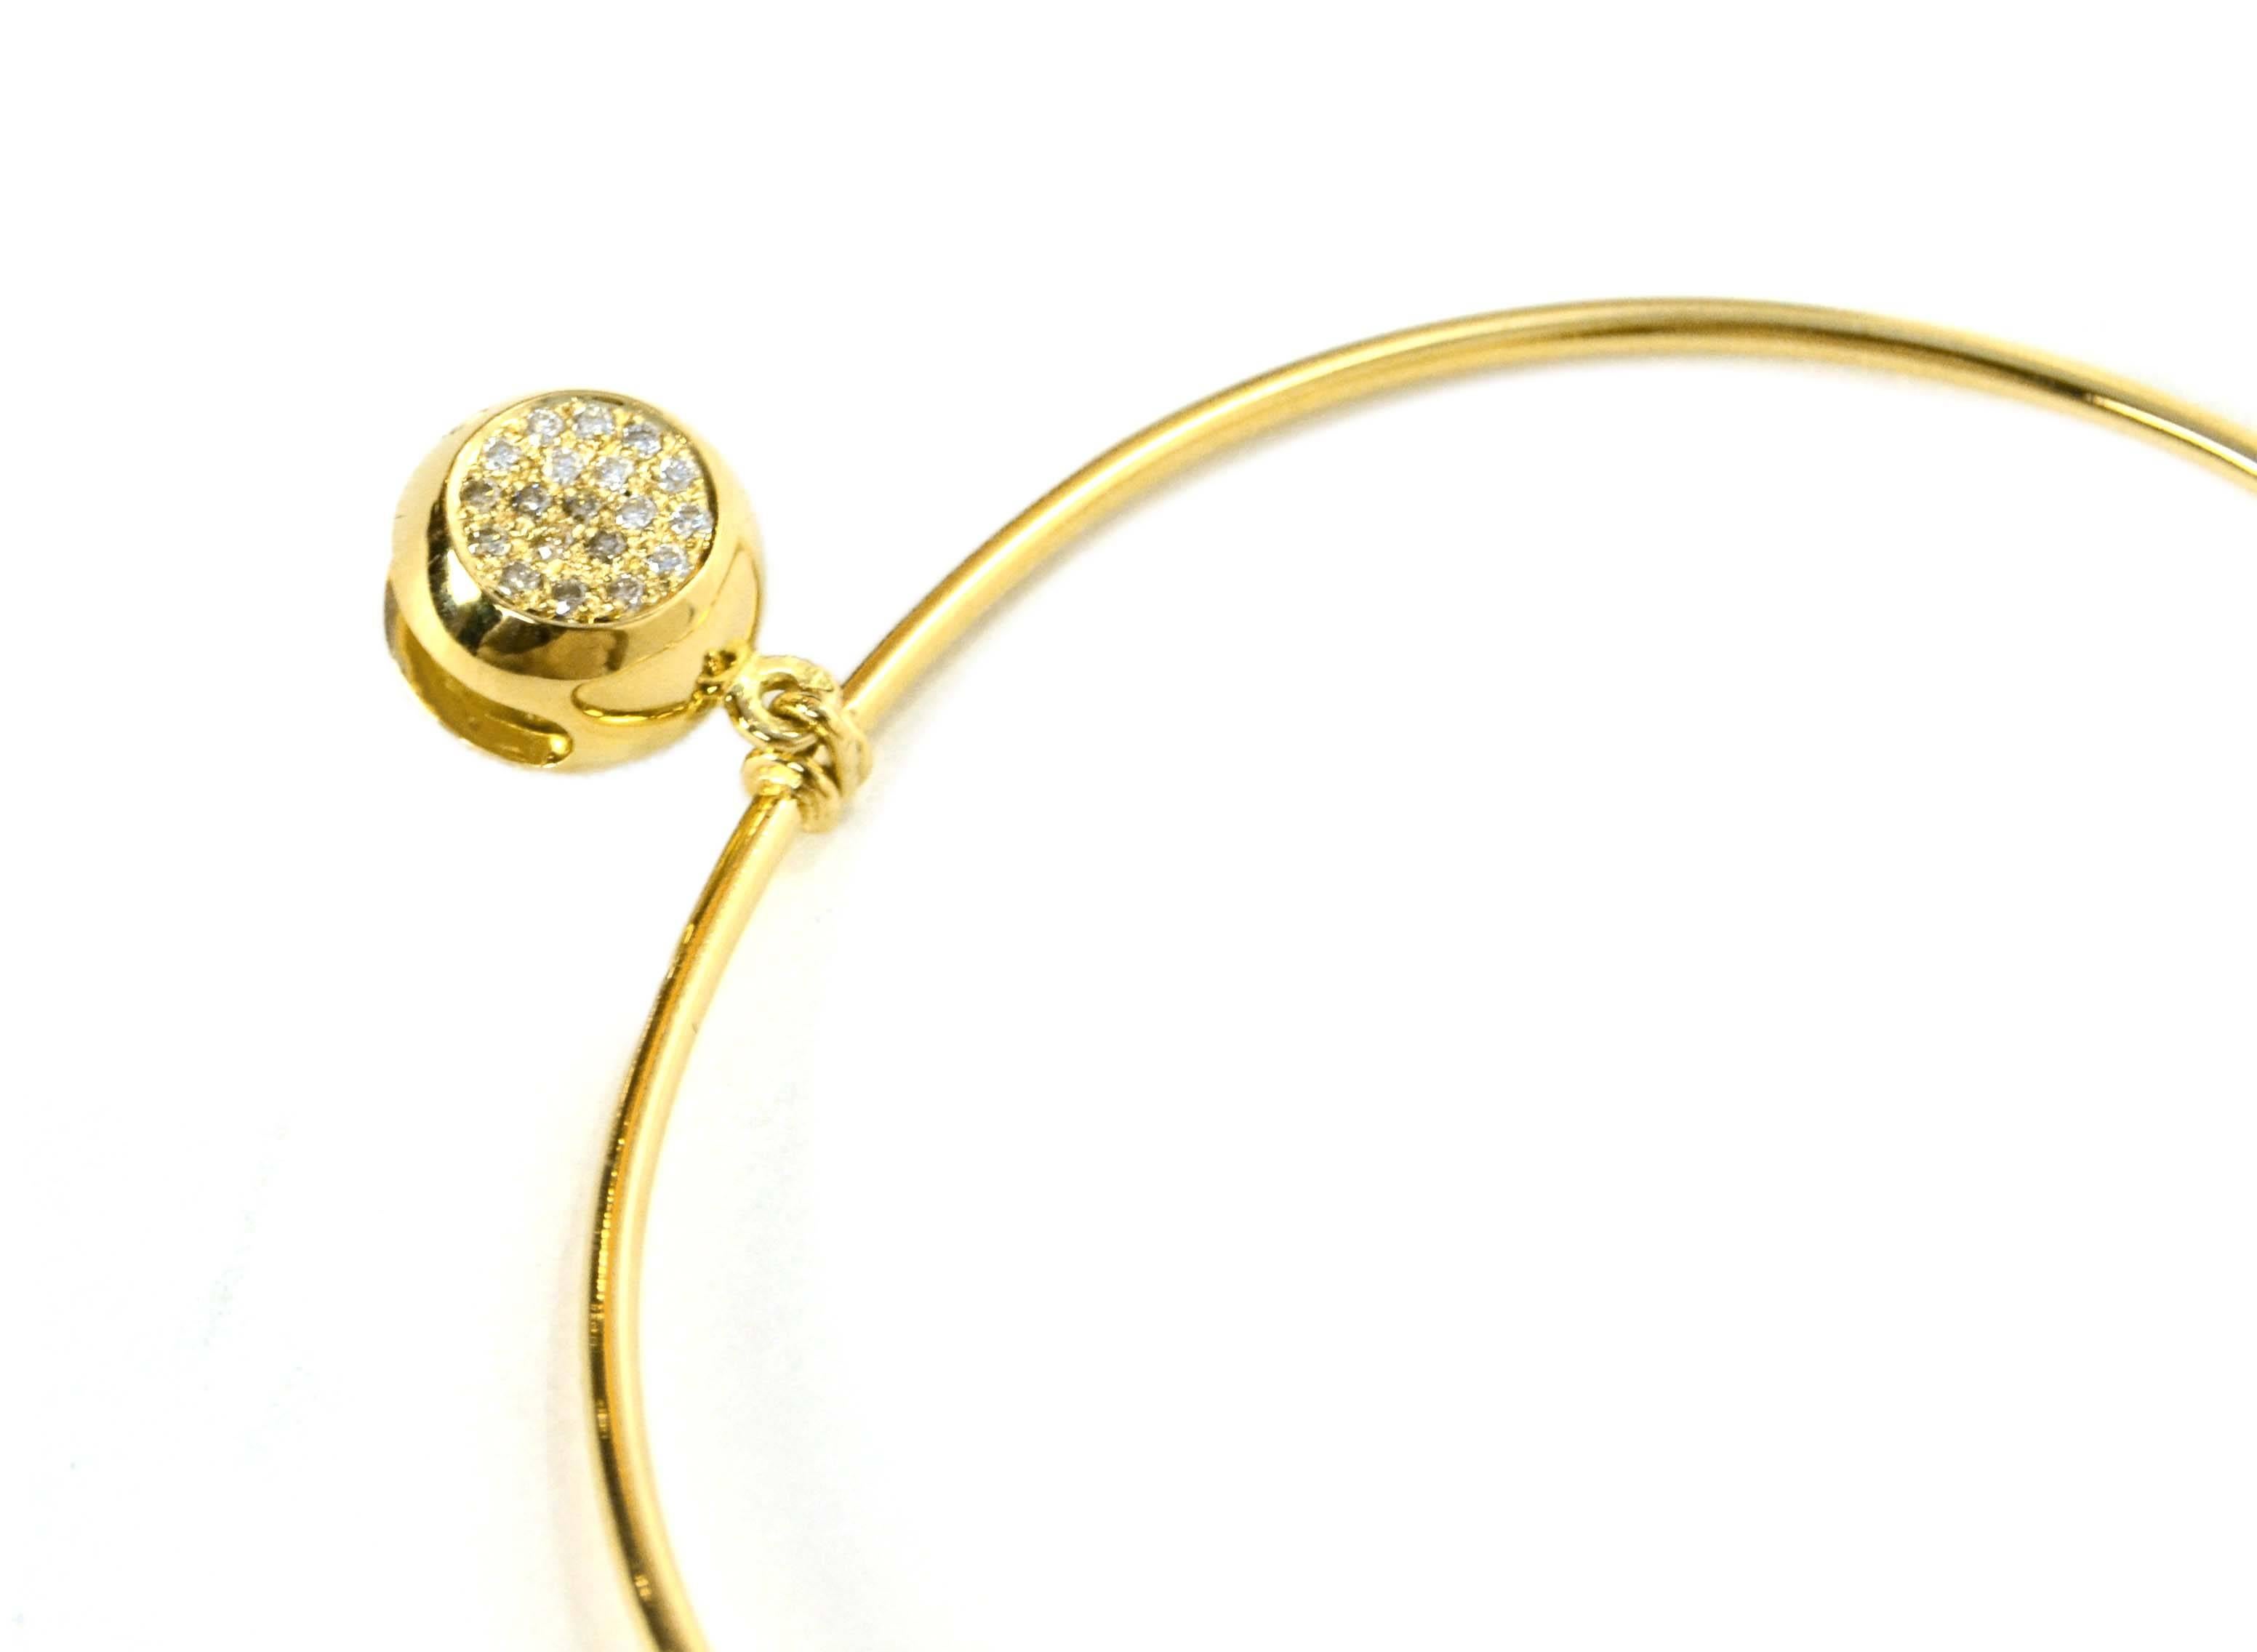 Features bell charm with diamonds on both sides.  One side has engraved clover surrounded by diamonds. 

-Color: Gold
-Materials: 18k gold and pave diamonds
-Closure: Hook
-Stamp: Aurelie Bidermann 750
-Retail Price: $4,200 + tax
-Overall